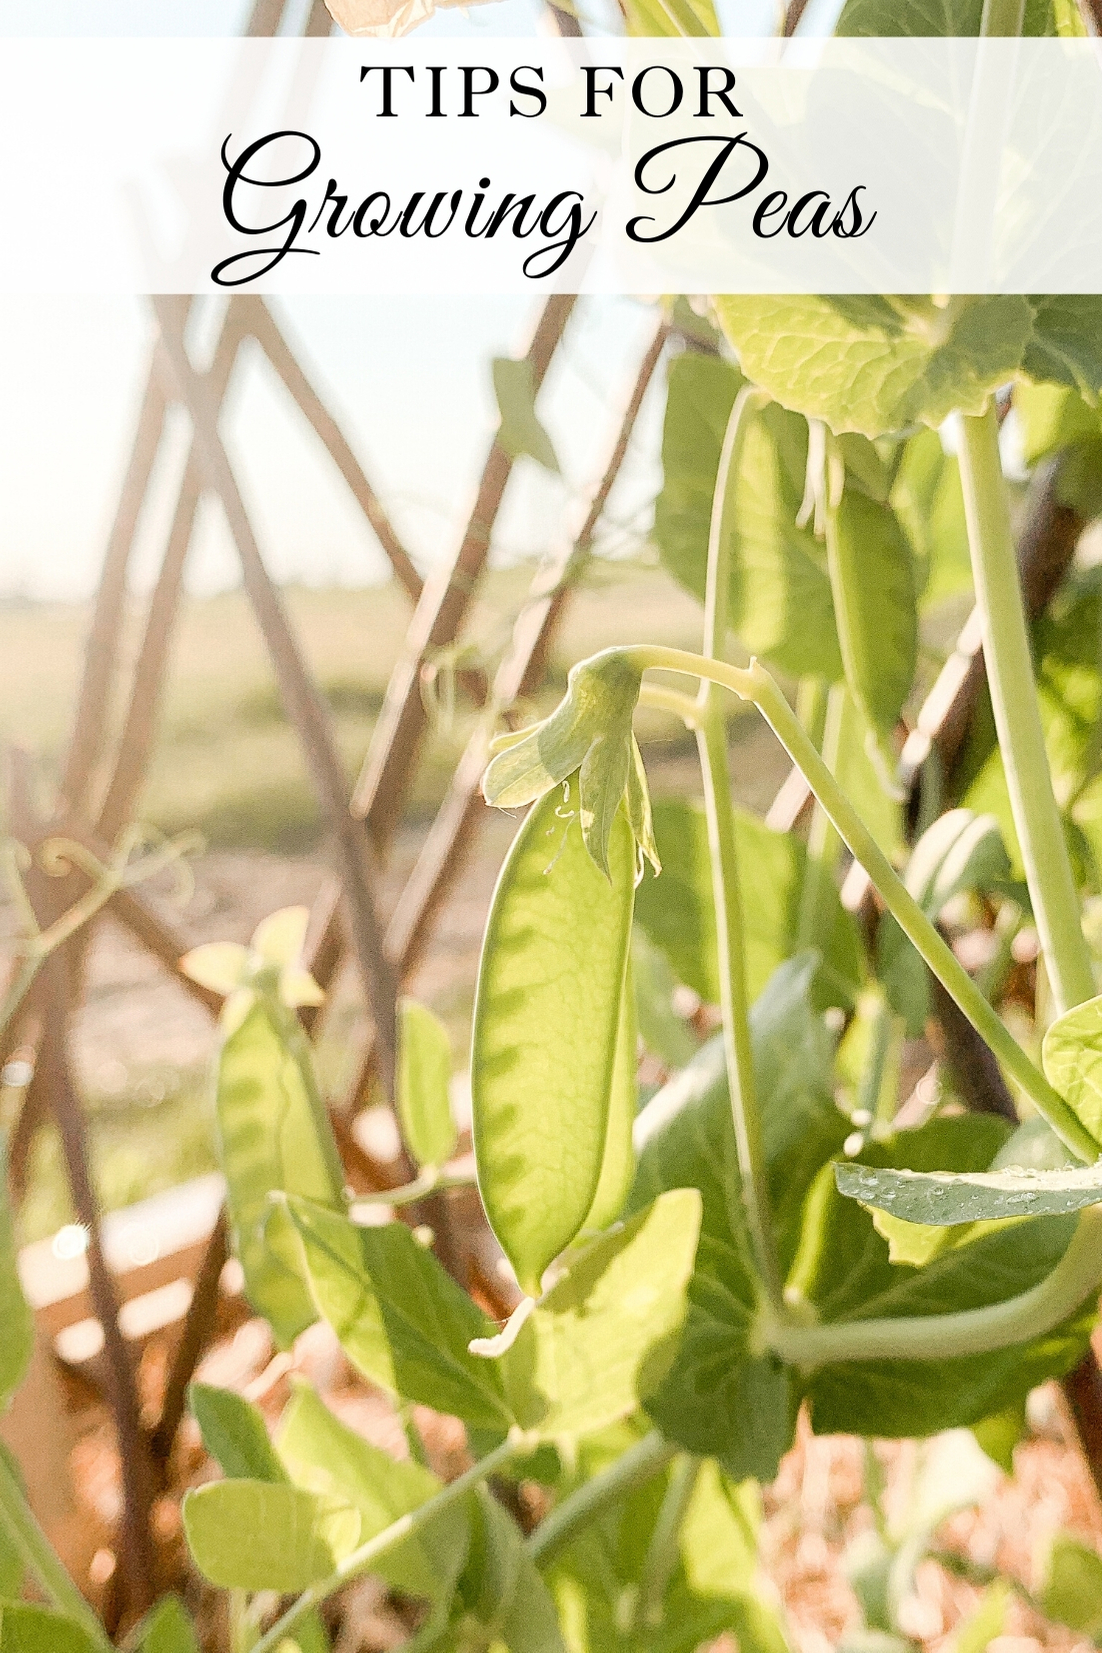 Tips for growing peas